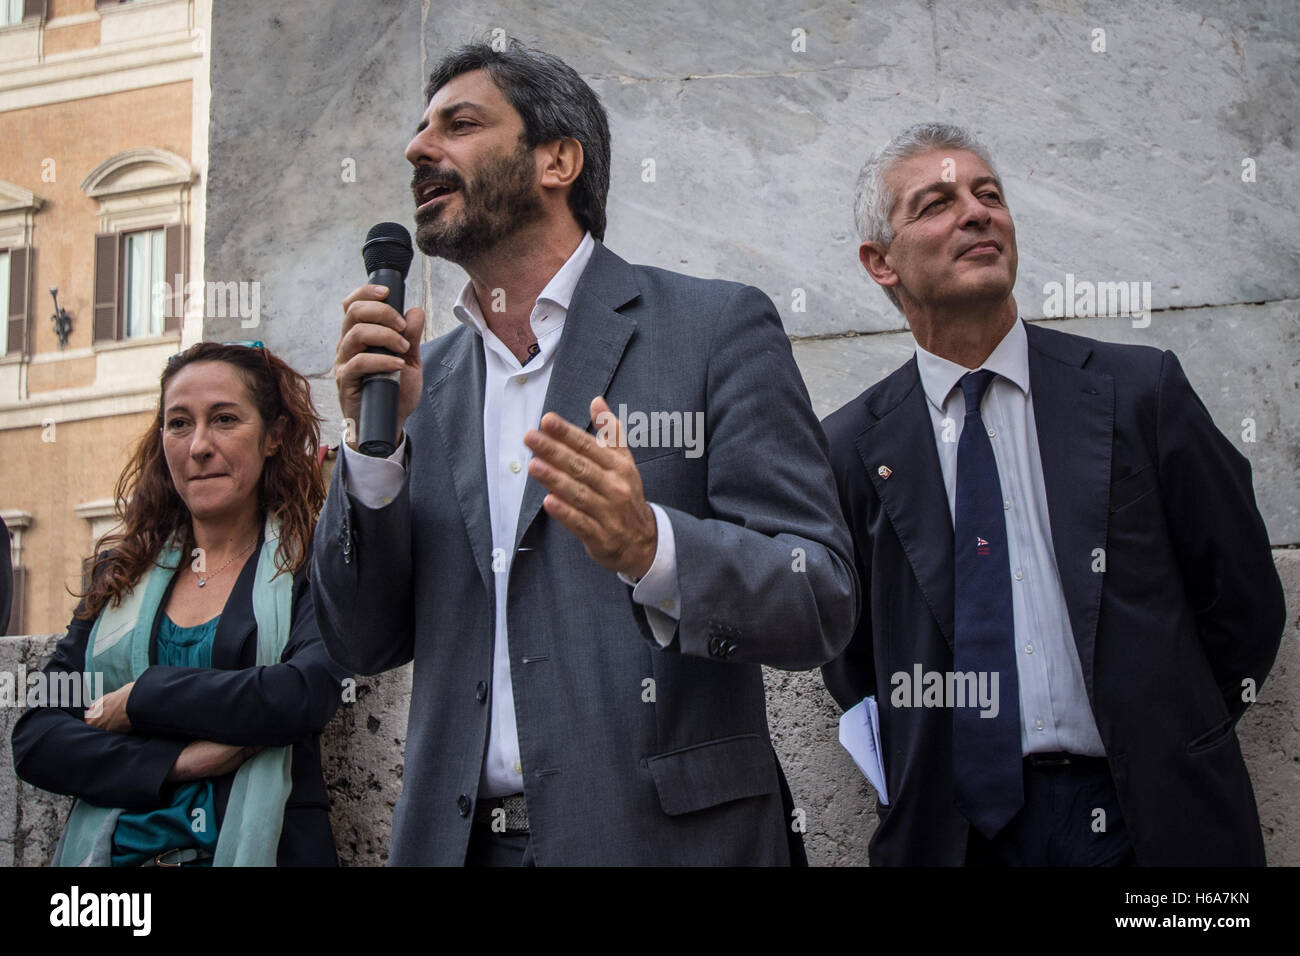 Rome, Italy. 25th Oct, 2016. Italy Rome 25 October 2016, Manifestation of the 5 Star Movement (m5s) in support of the bill to halve the salaries of parliamentarians. *** Local Caption *** Italy Rome 25 October 2016, Manifestation of the 5 Star Movement (m5s) in support of the bill to halve the salaries of parliamentarians. IIn the picture Paola Taverna, Roberto Fico, Nicola Morra Credit:  Andrea Ronchini/Alamy Live News Stock Photo